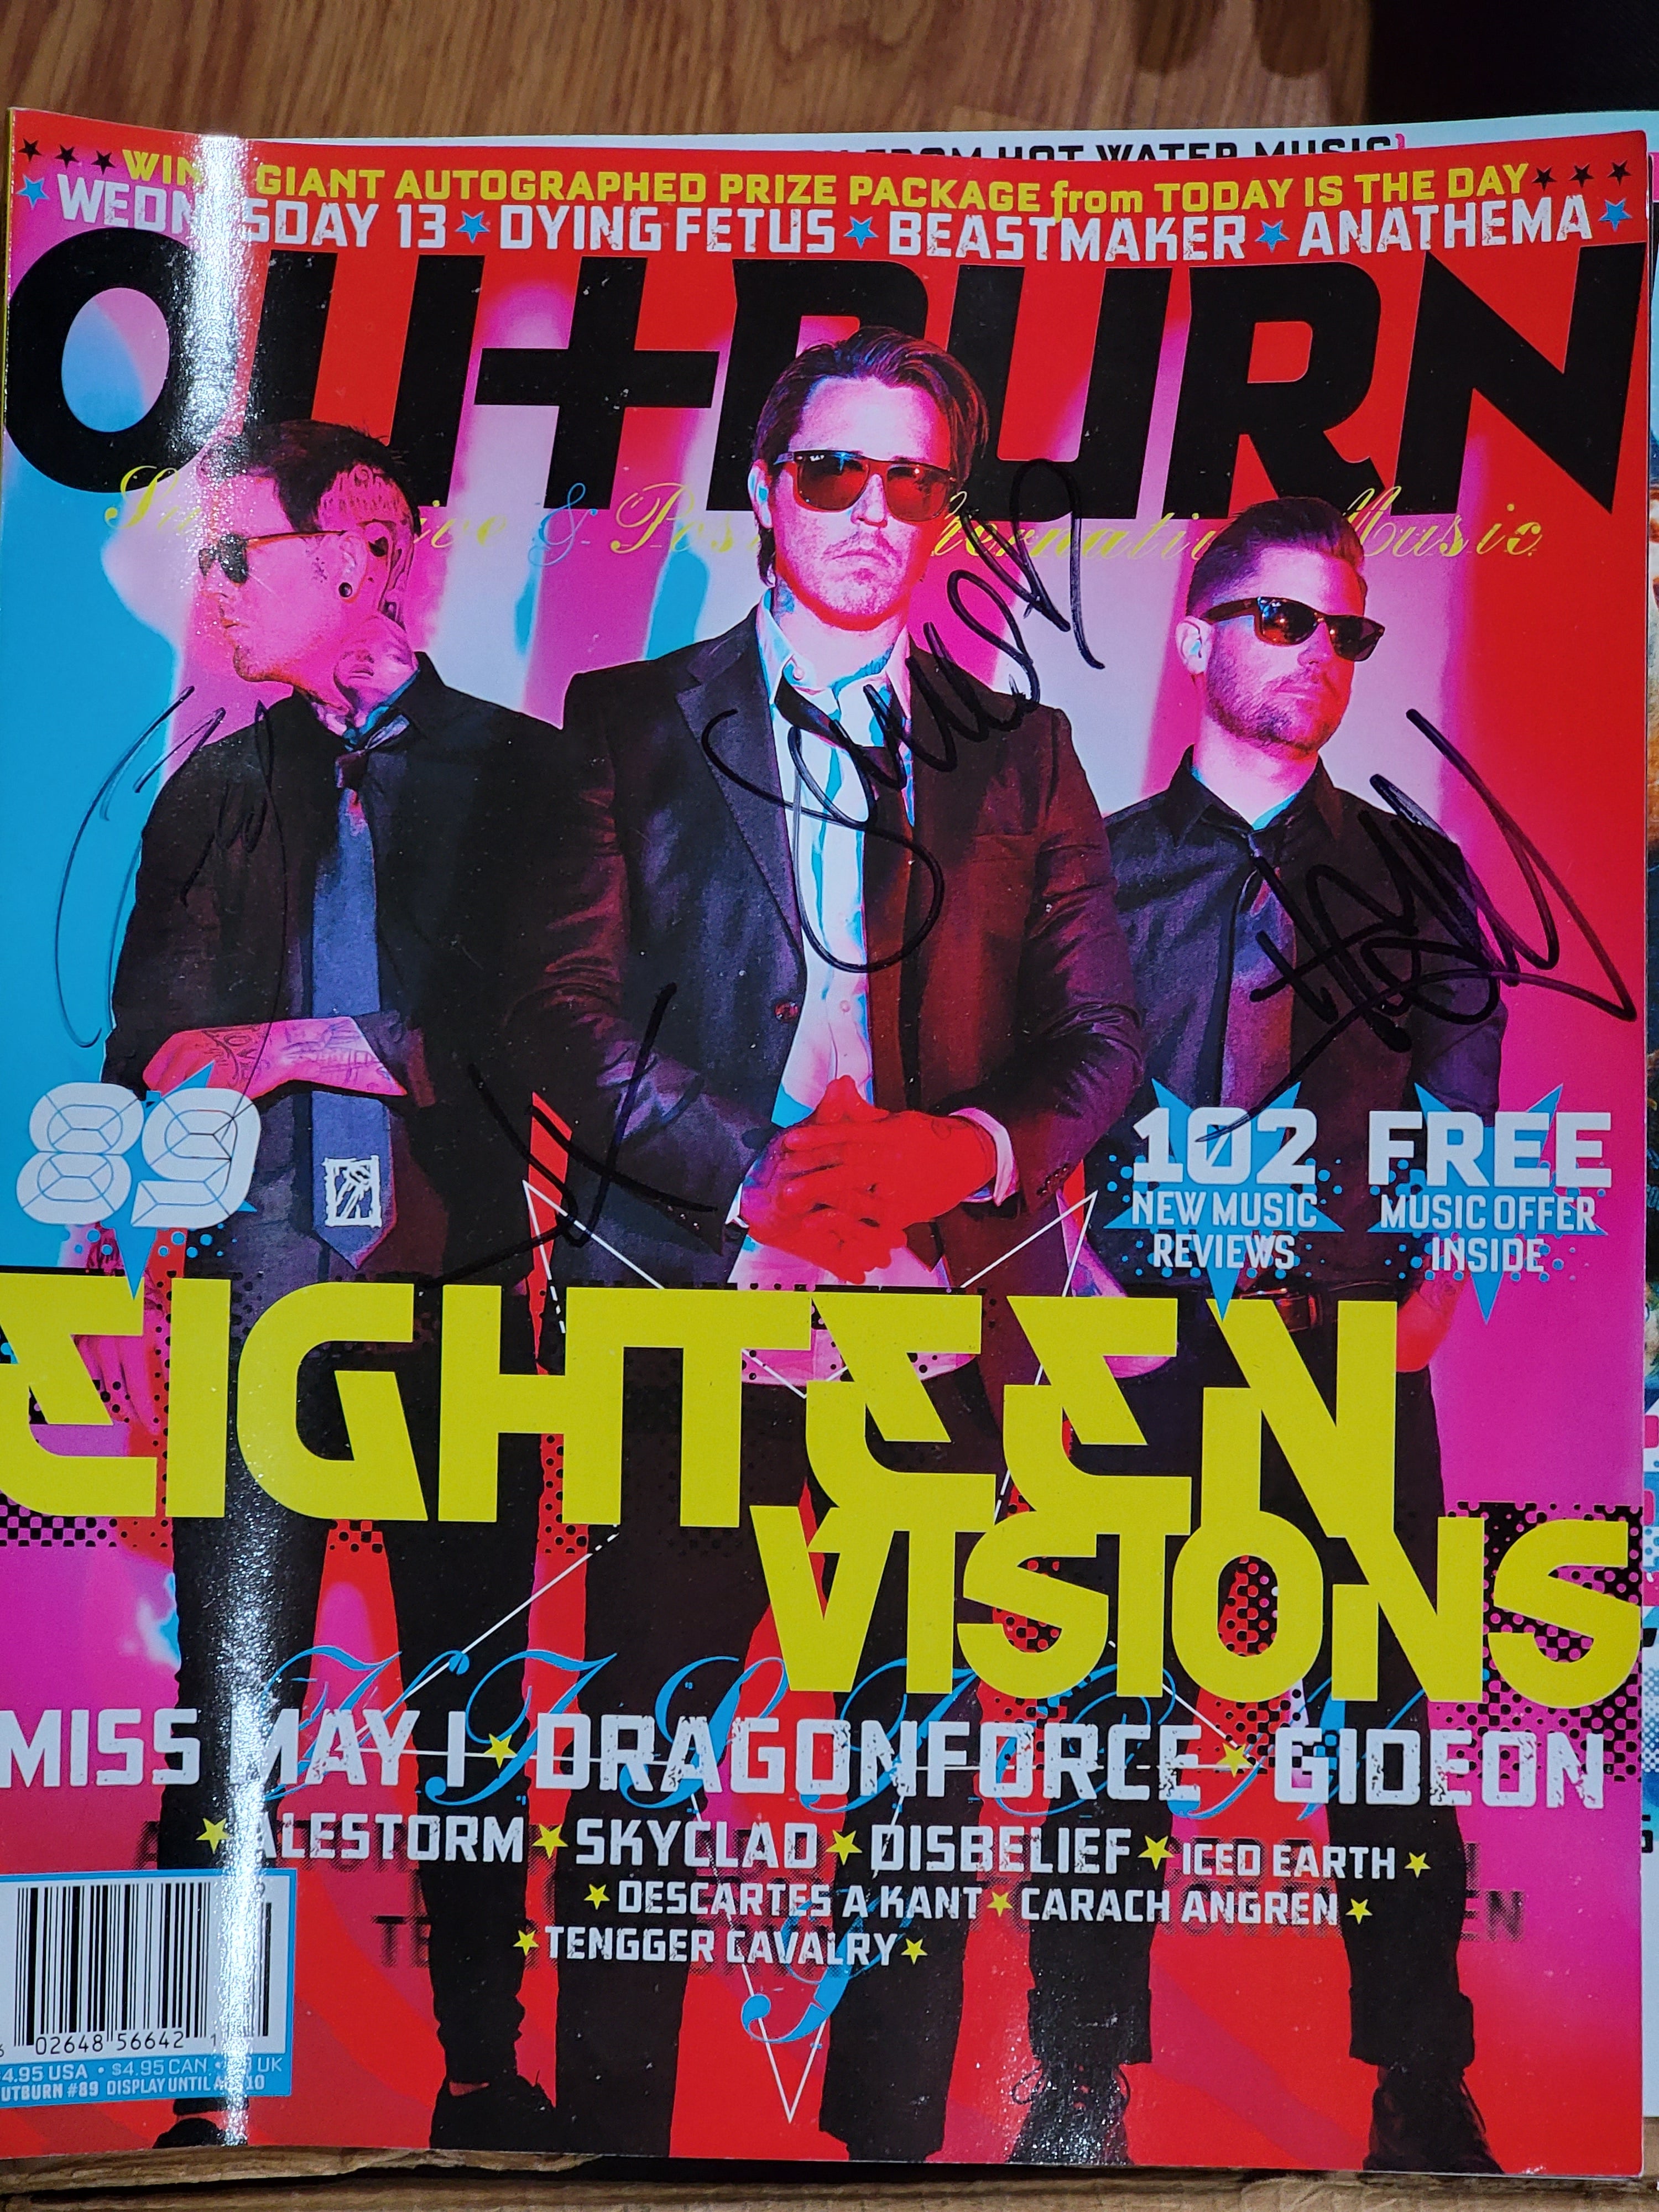 Outburn 89 - Eighteen Vision - Autographed by Eighteen Visions